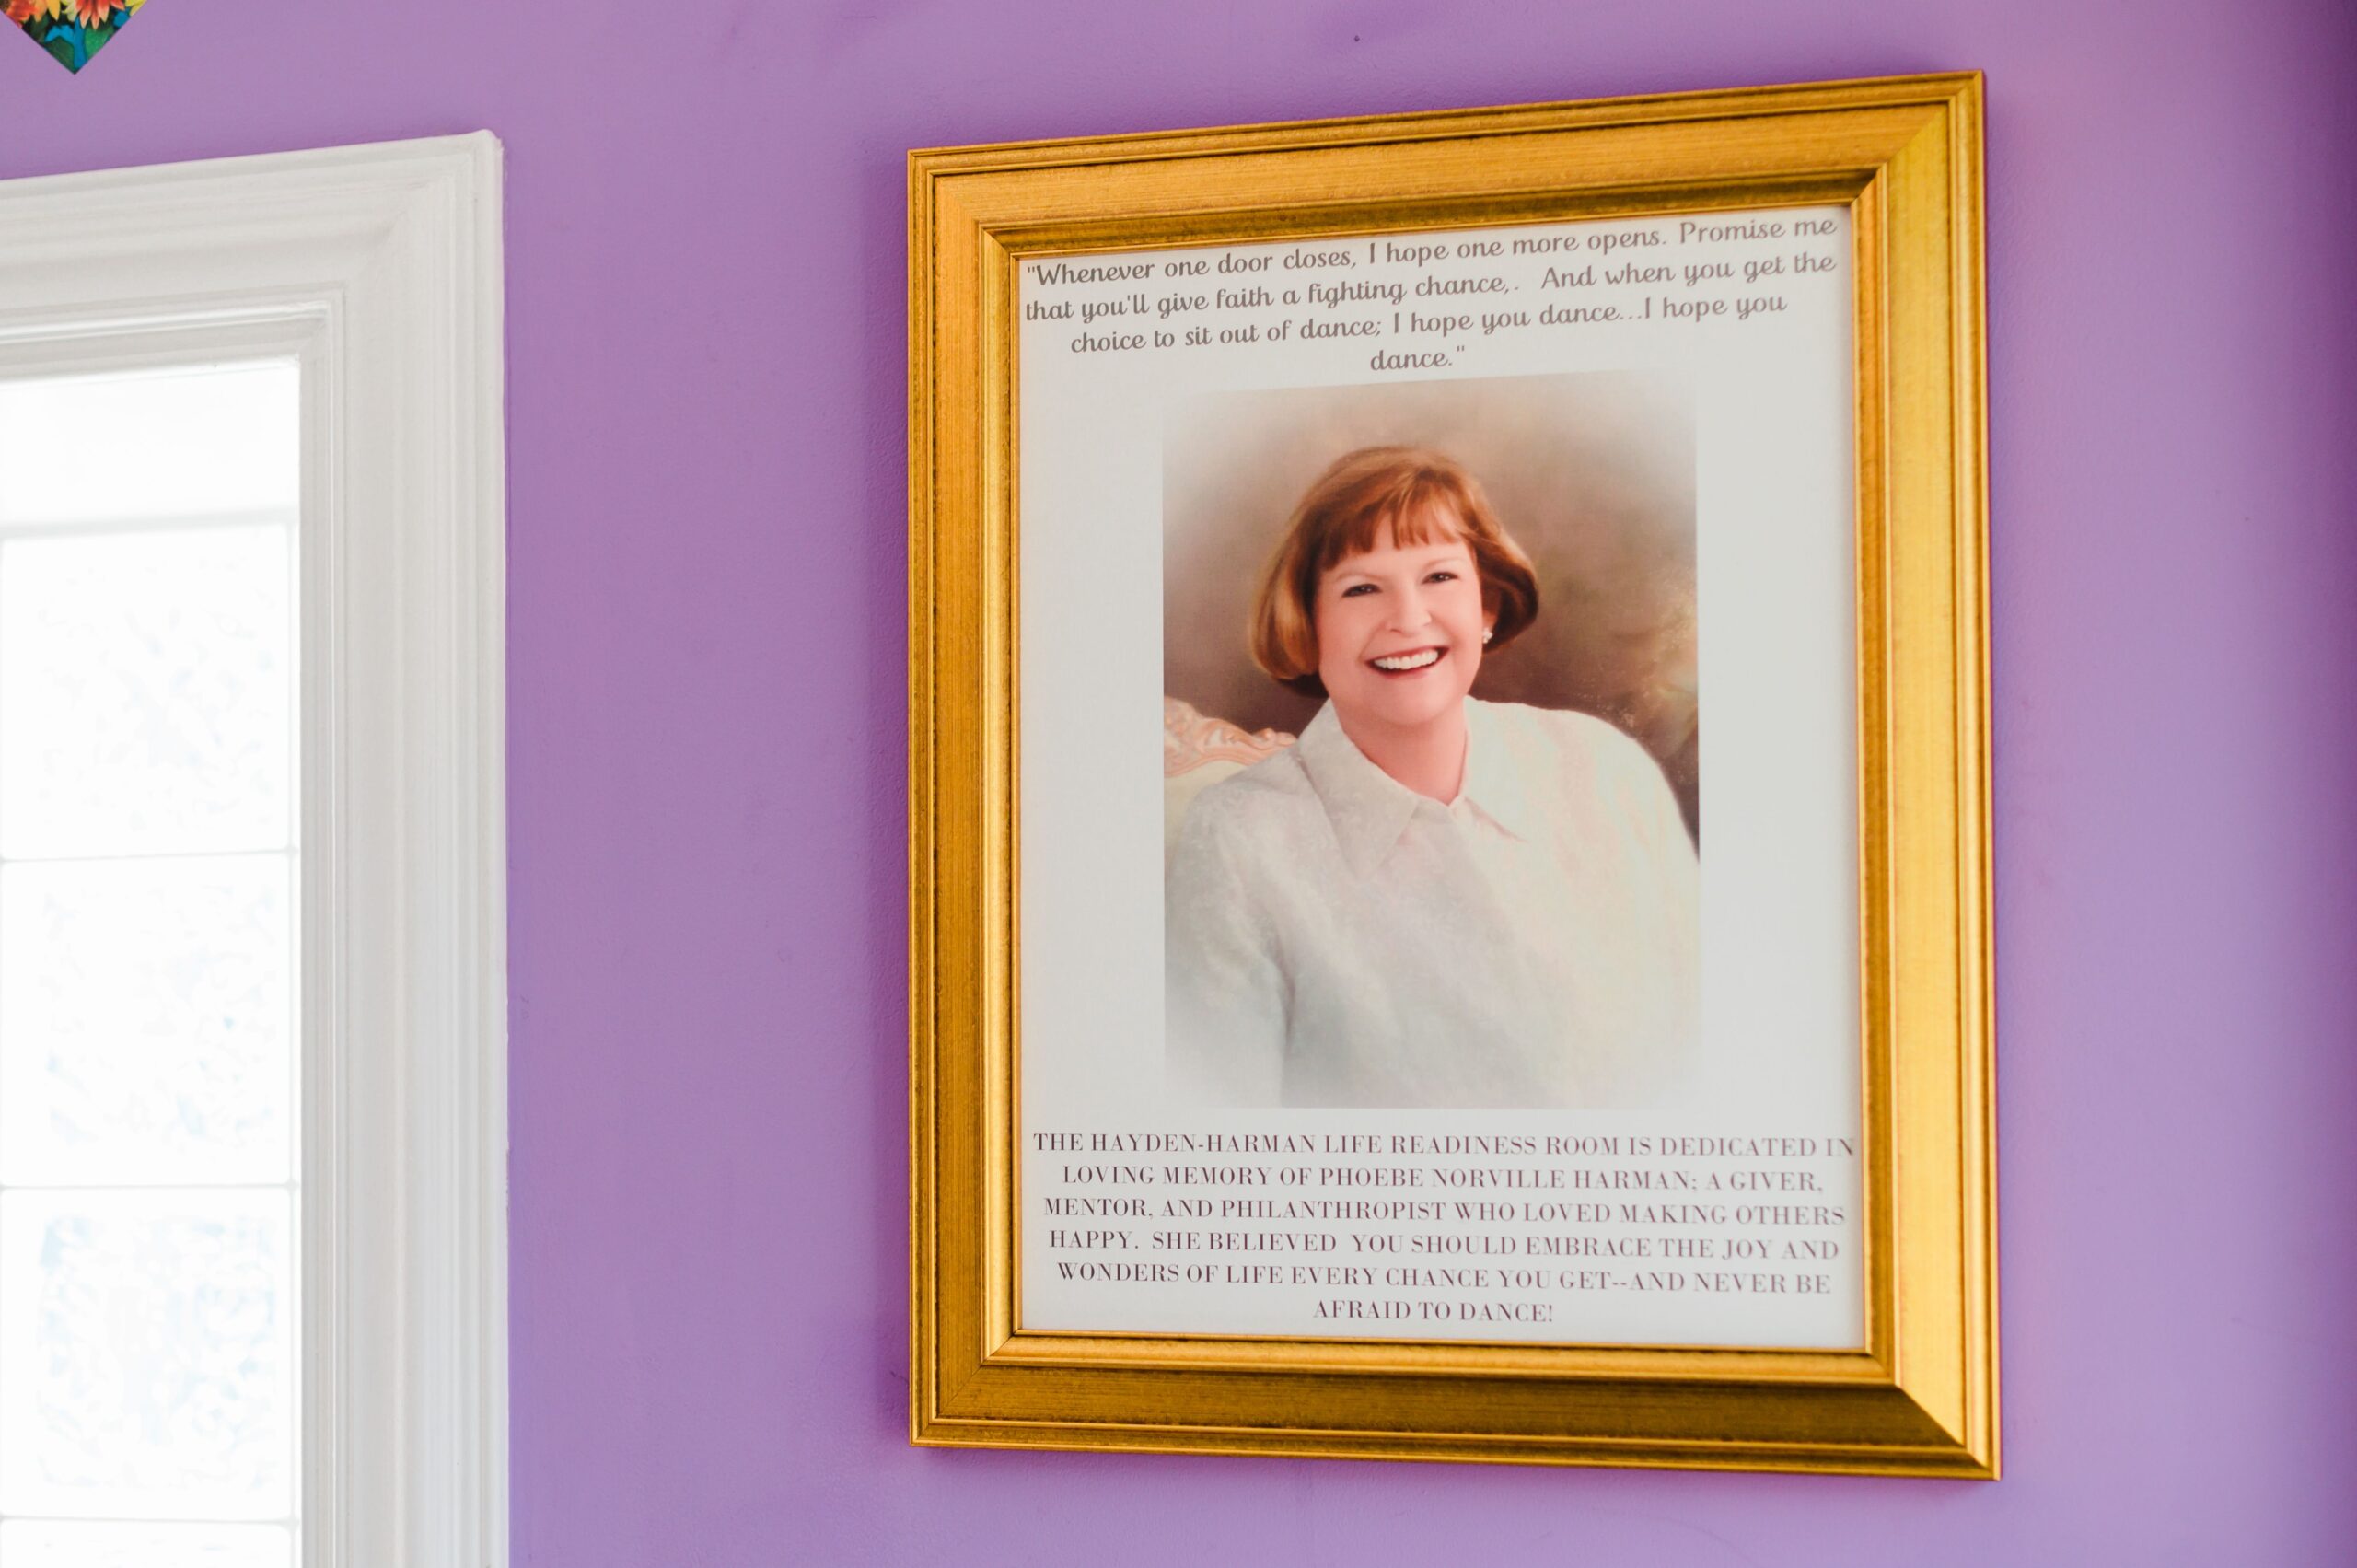 A photo frame at D-UP dedicating the room to Phoebe Norville Harman, a giver, mentor, and philanthropist in the High Point, NC community.